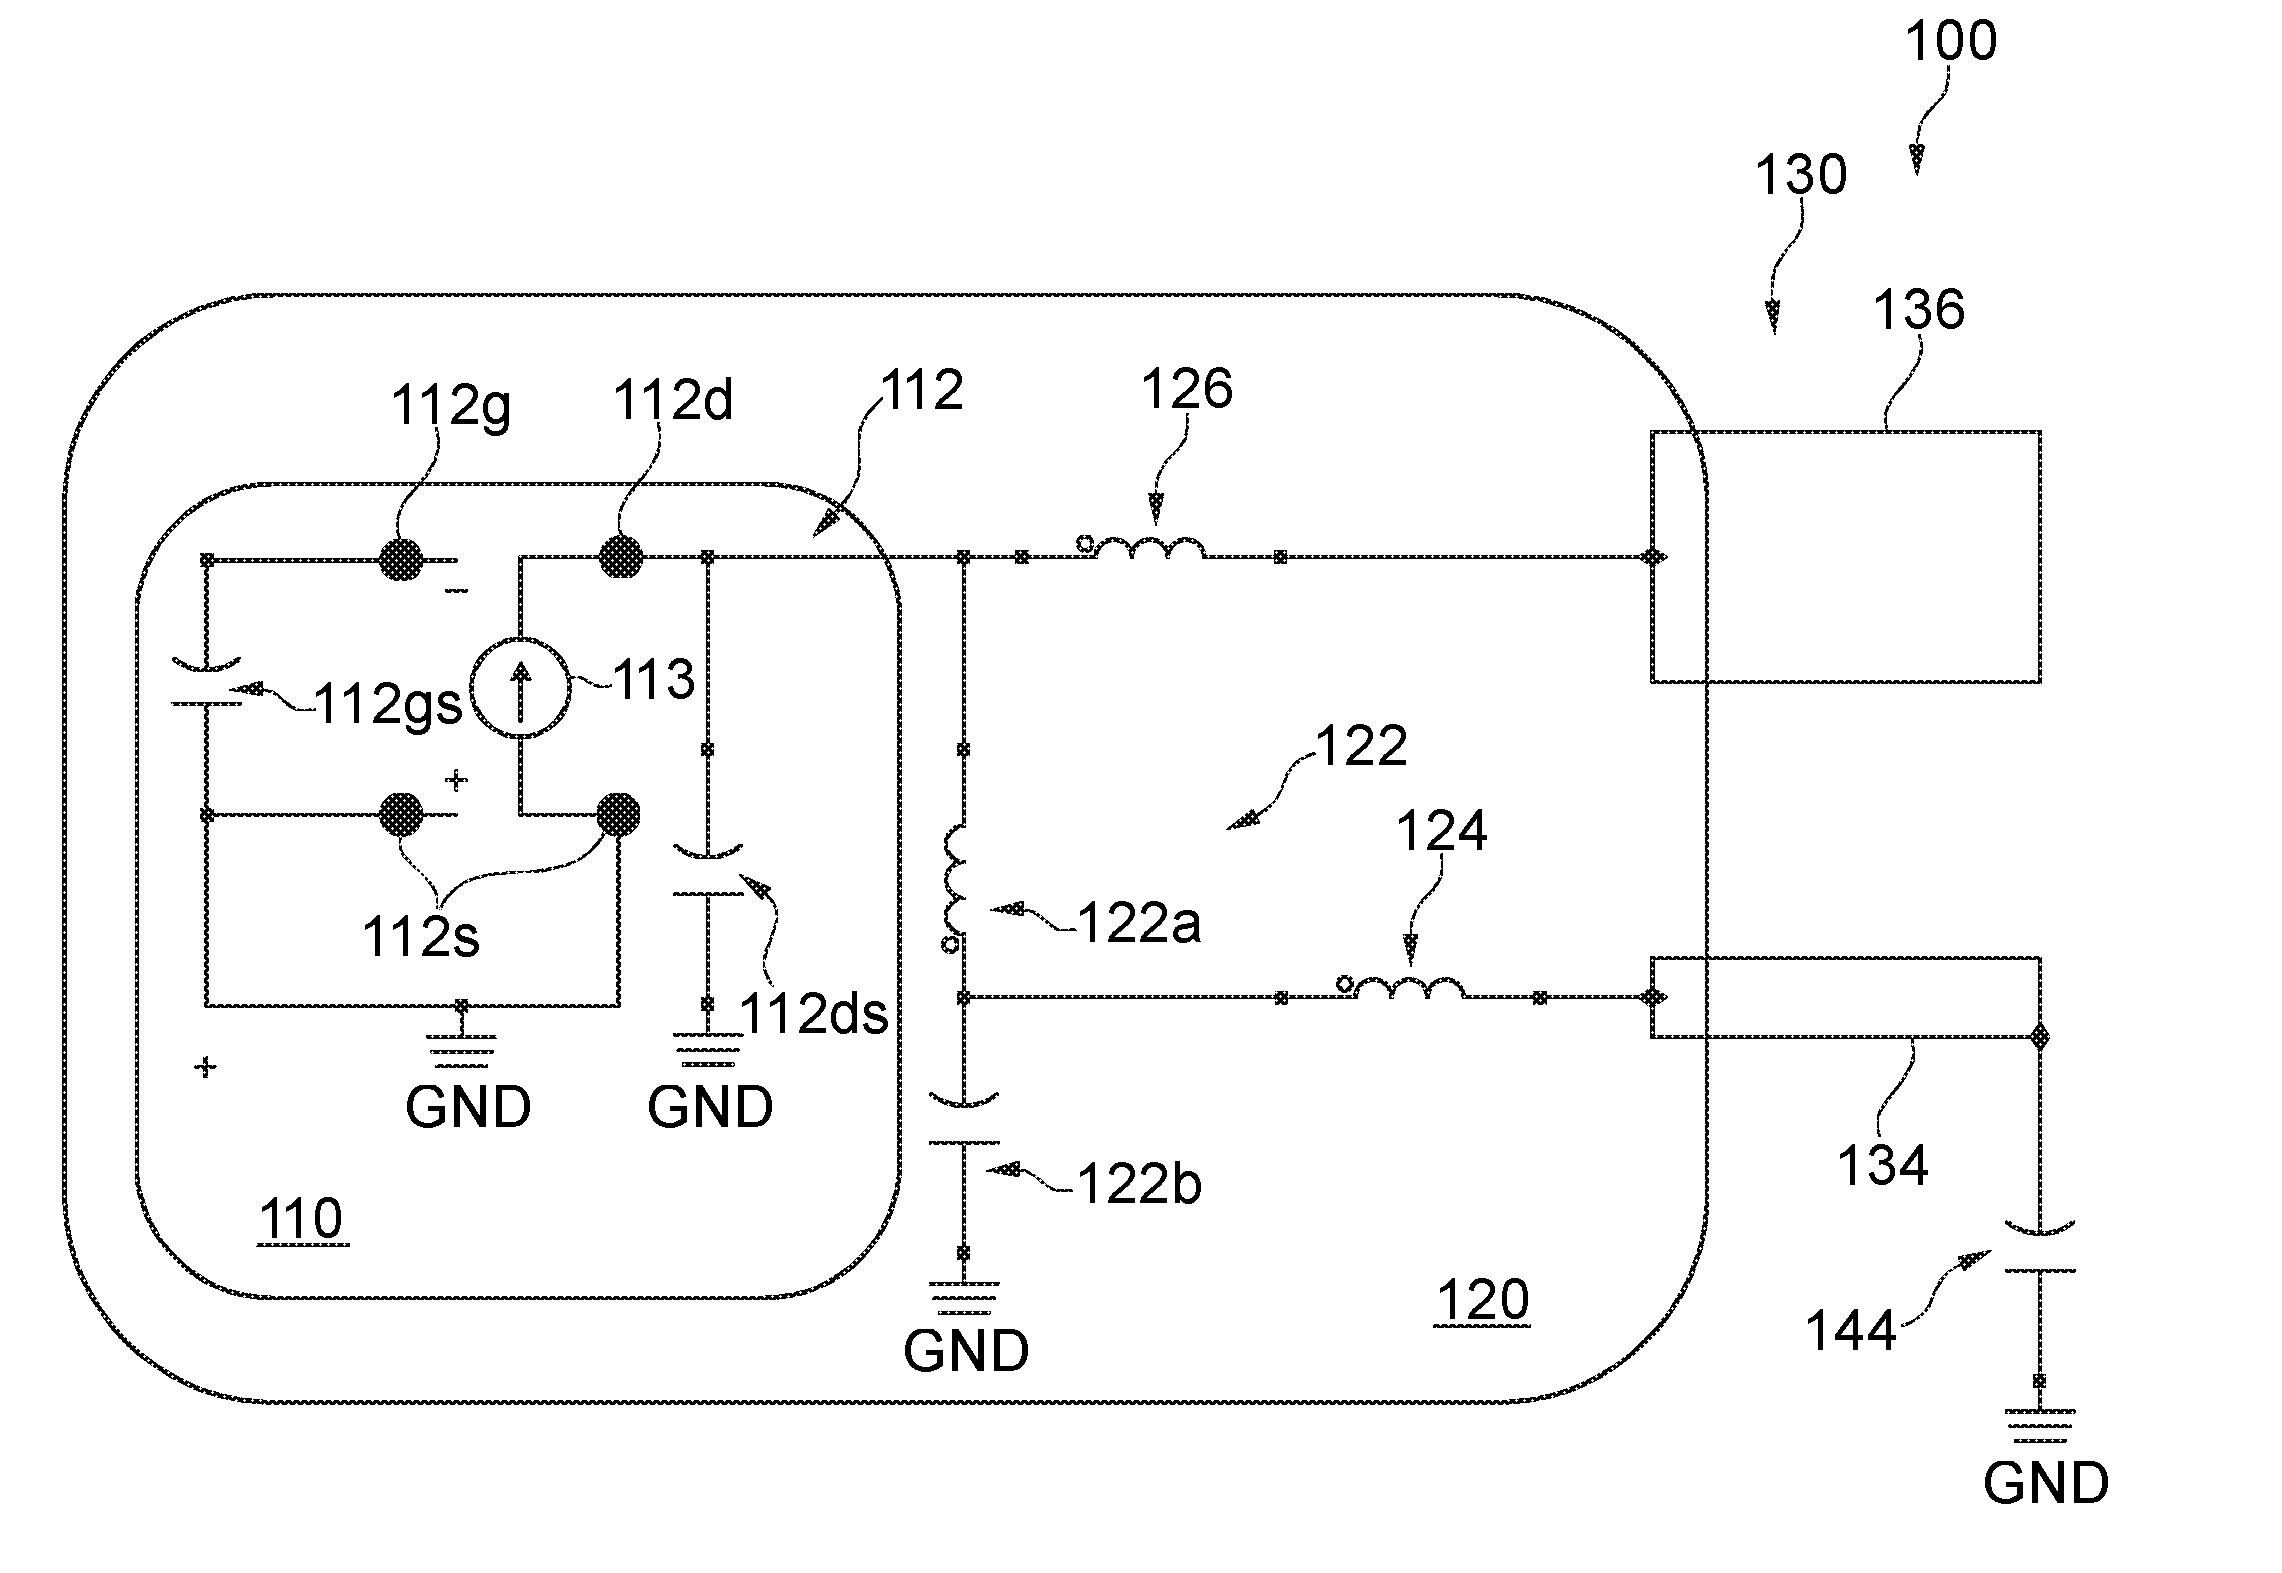 Packaged RF power transistor device having next to each other a ground and a video lead for connecting a decoupling capacitor, RF power amplifier